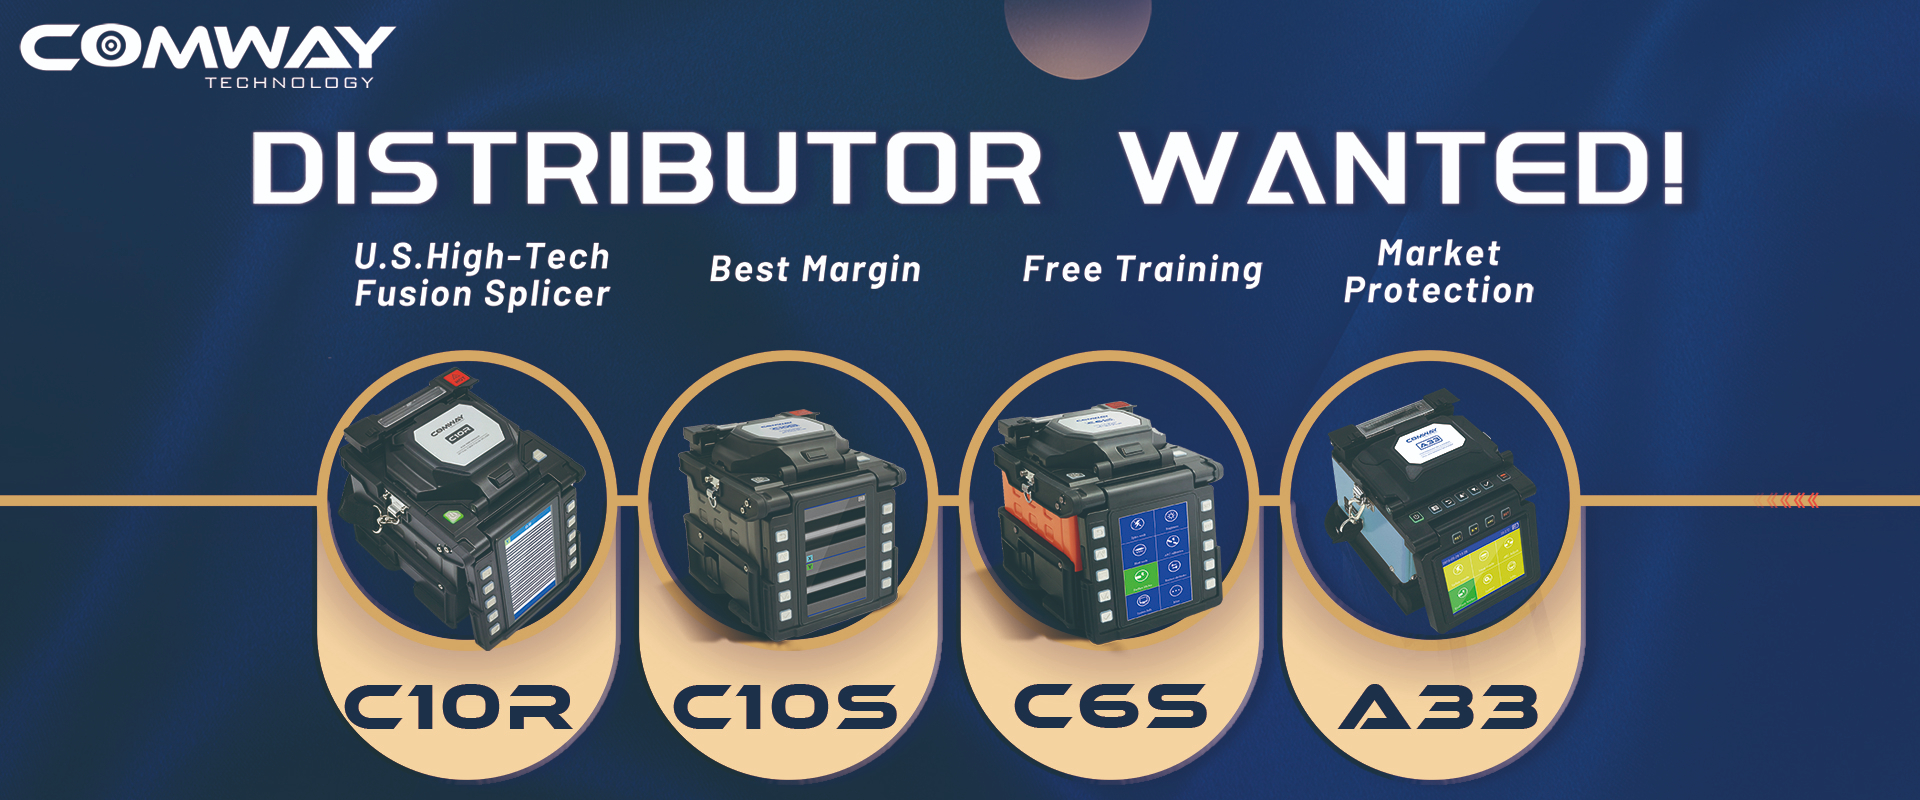 COMWAY Fusion Splicer Distributor Wanted